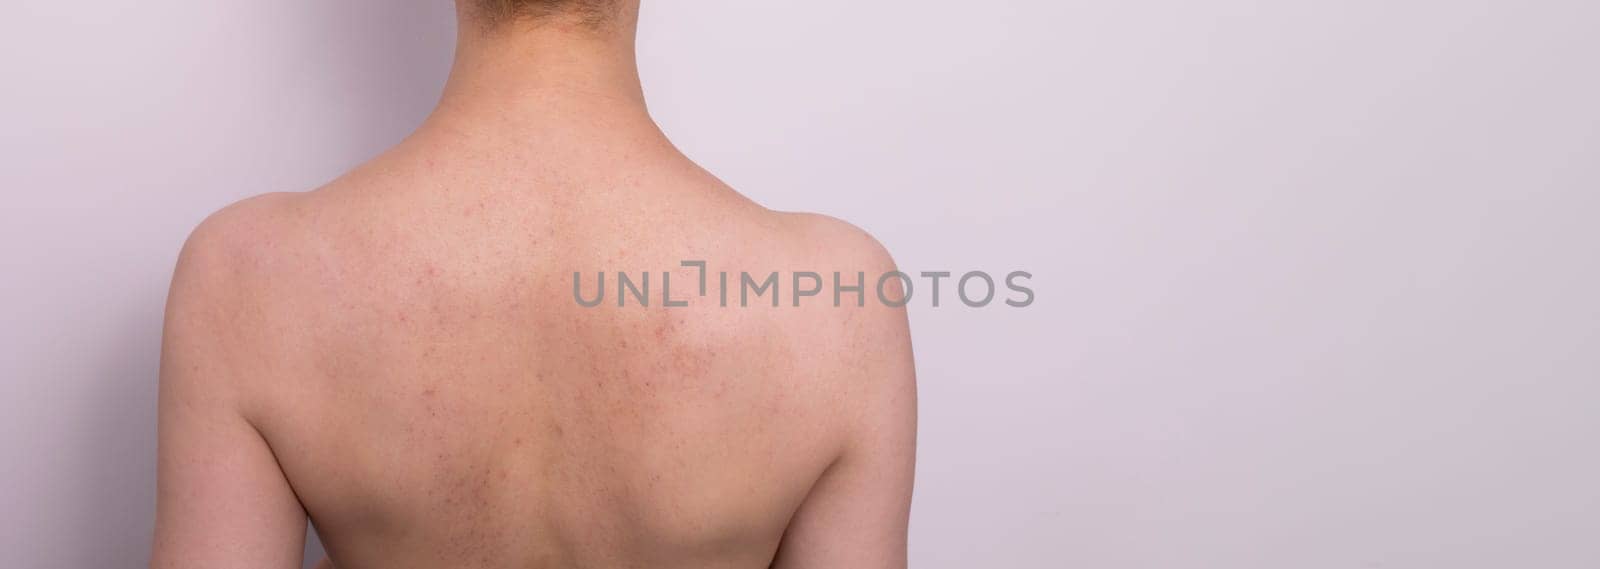 Bruises, Broken Capillaries After Cupping, Anti Cellulite Massage Procedure On Woman's Back. Feeling Bad, Effect, Consequences After Massage. Complications. Copy Space For Text Horizontal Plane.